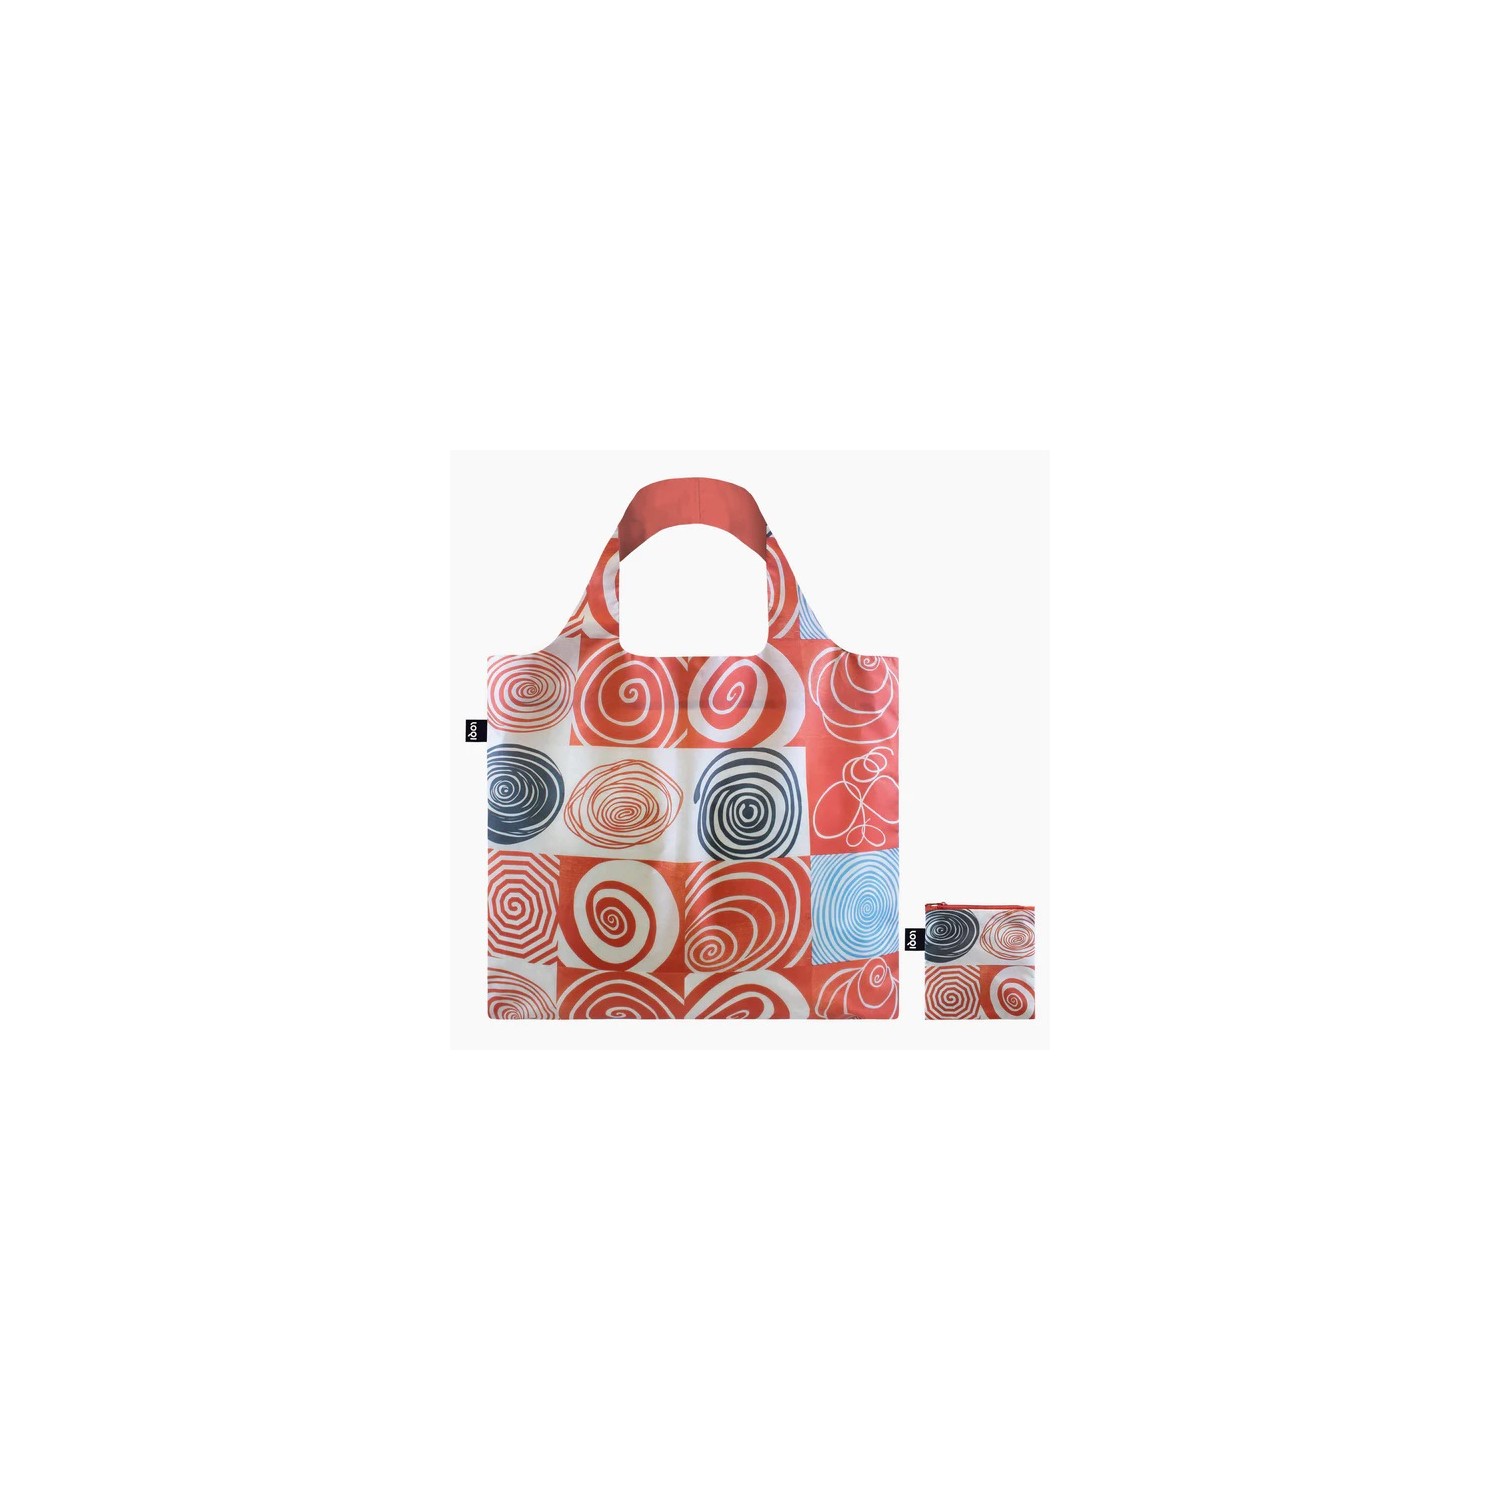 LOQI Tote Bag - Louise Bourgeois - Spirals Black